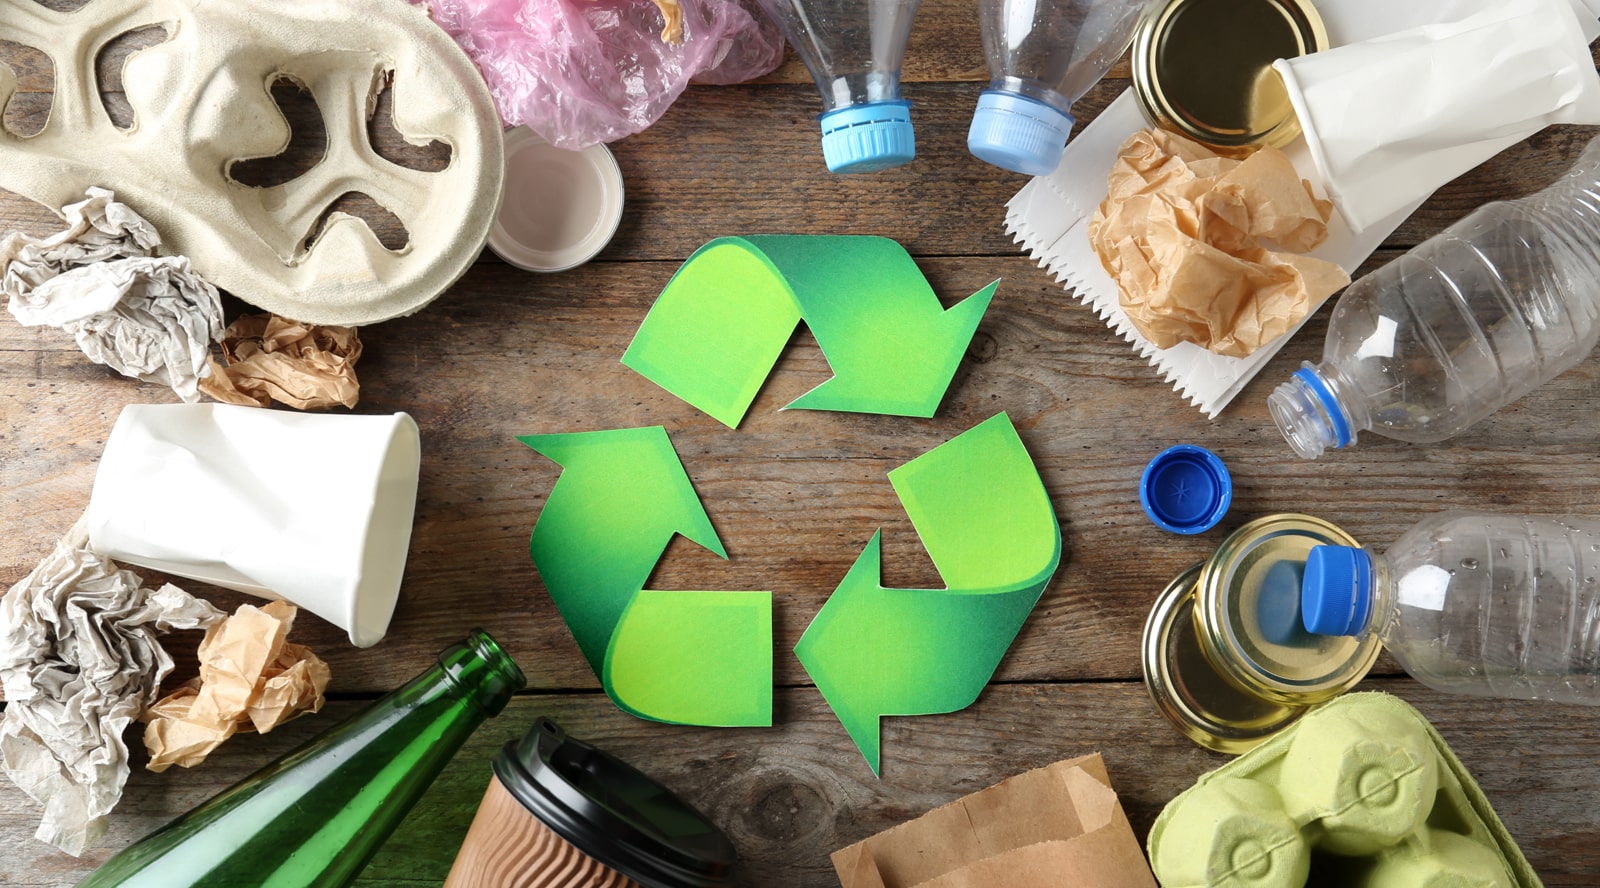 How Does Recycling help the Environment